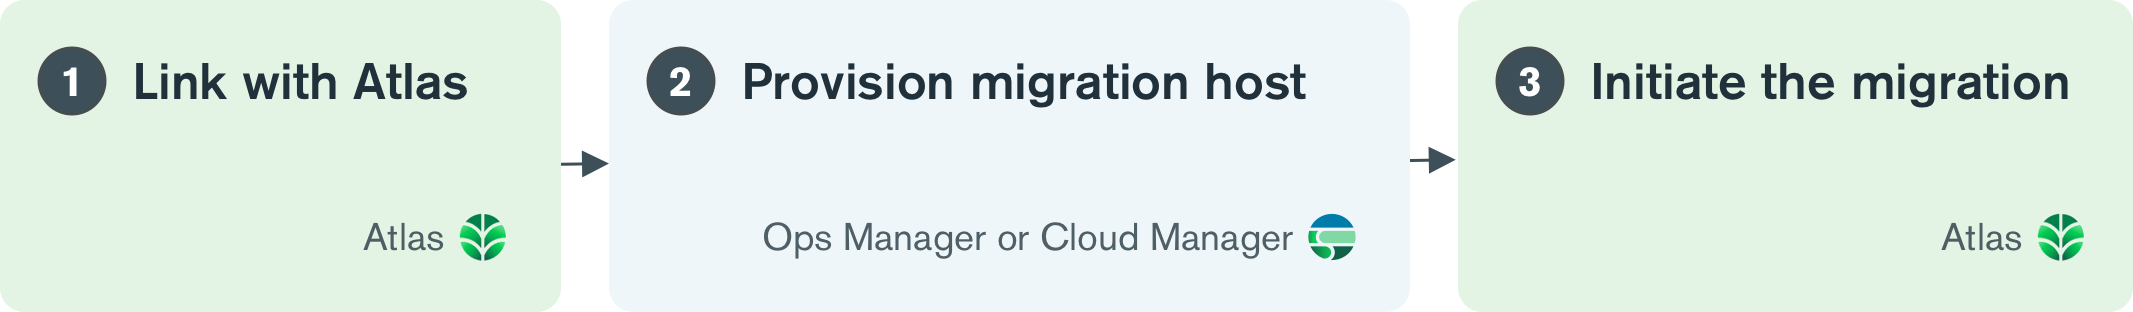 "To live migrate your deployment to Atlas, generate a link-token,
provision a migration host, and start live migration."